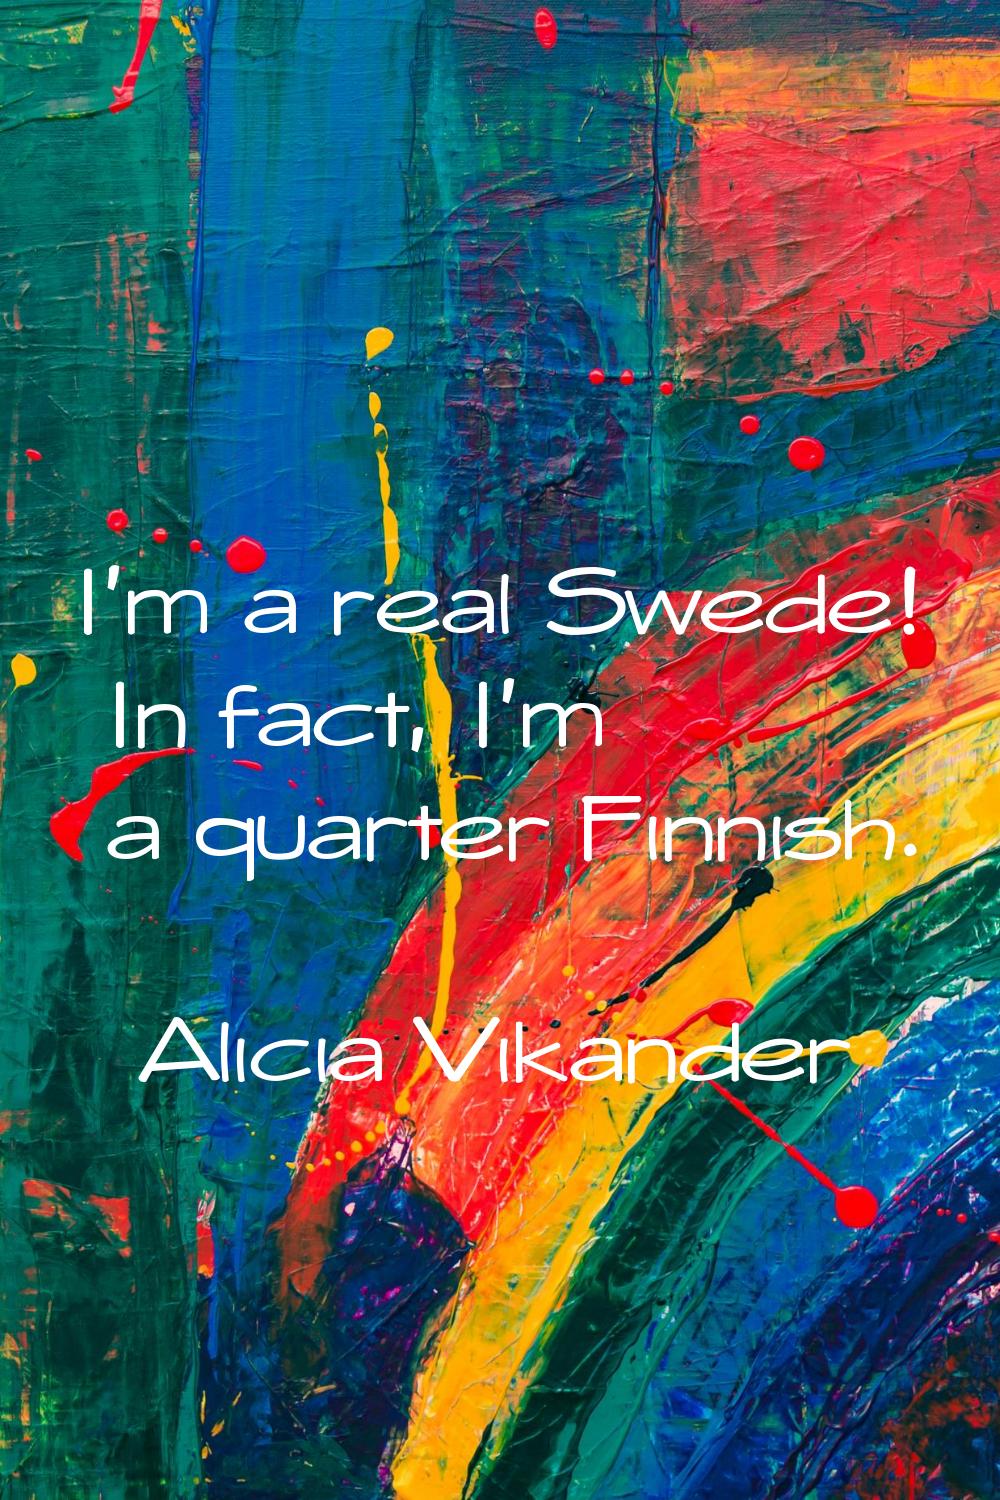 I'm a real Swede! In fact, I'm a quarter Finnish.